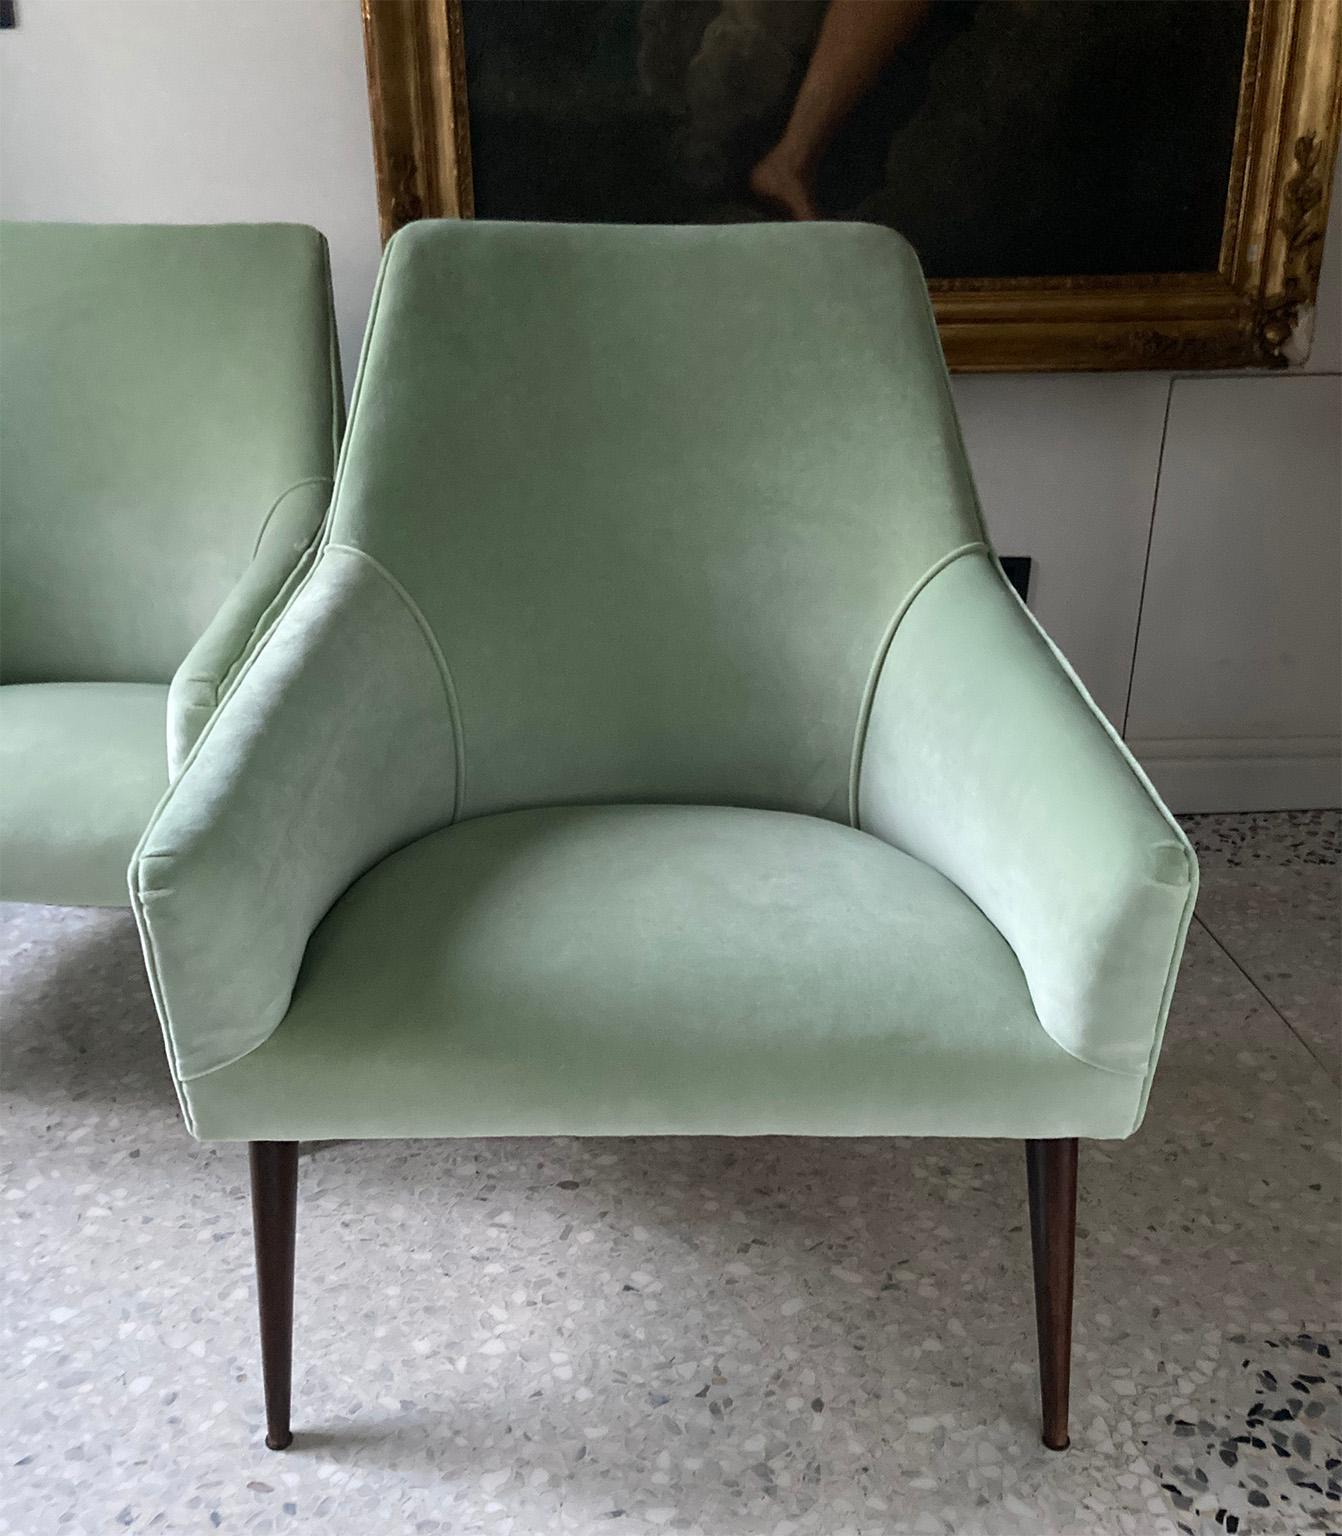 Gio Ponti Pair of Certified Rare Armchairs in Light Green Velvet, Italy 1960s For Sale 6